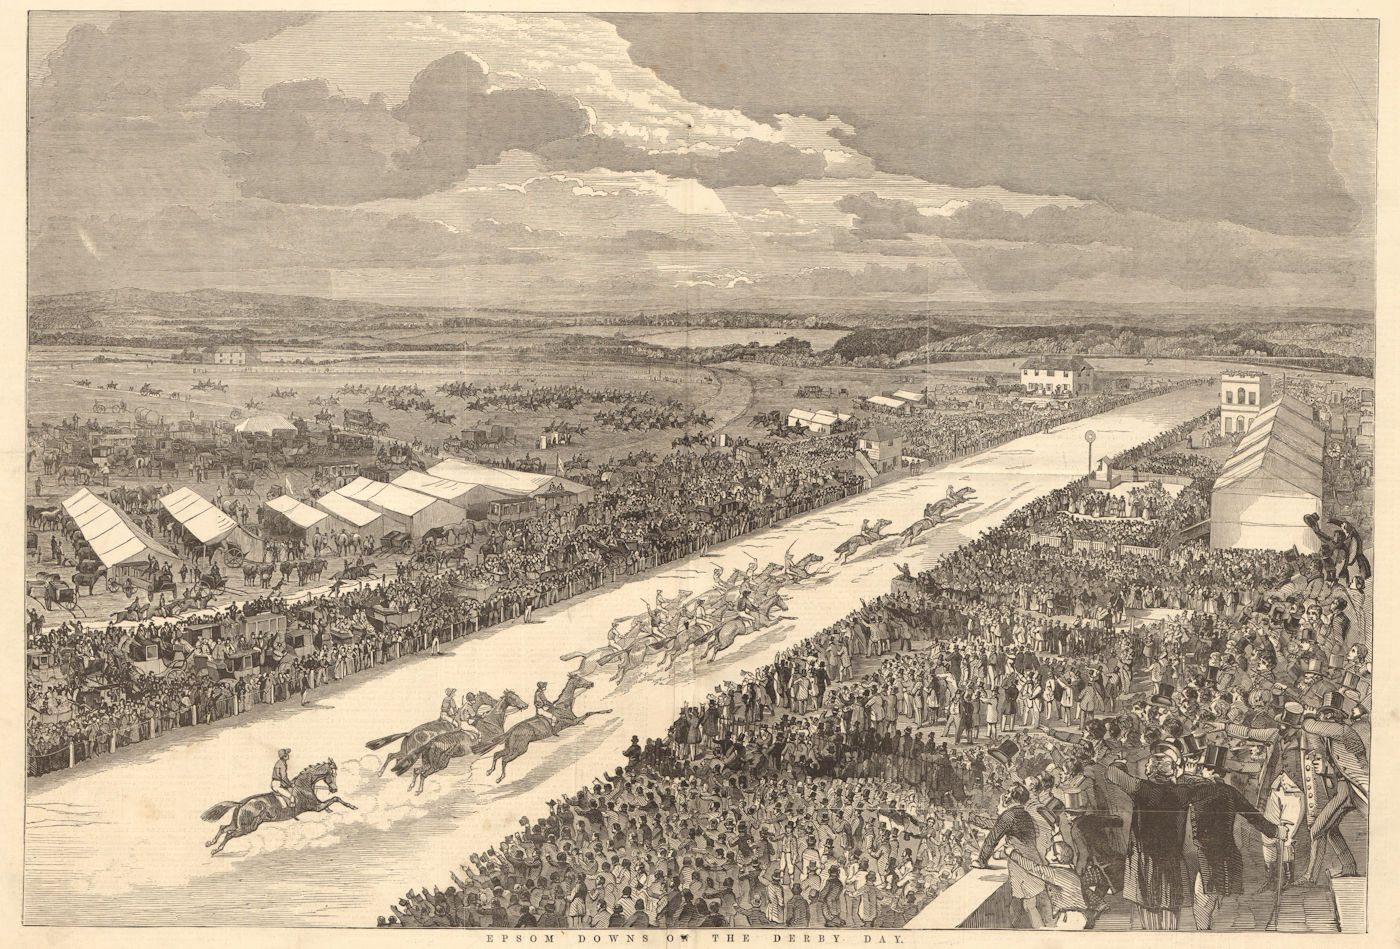 Epsom Downs on the Derby day - drawn by Duncan. Surrey. Racing 1848 old print